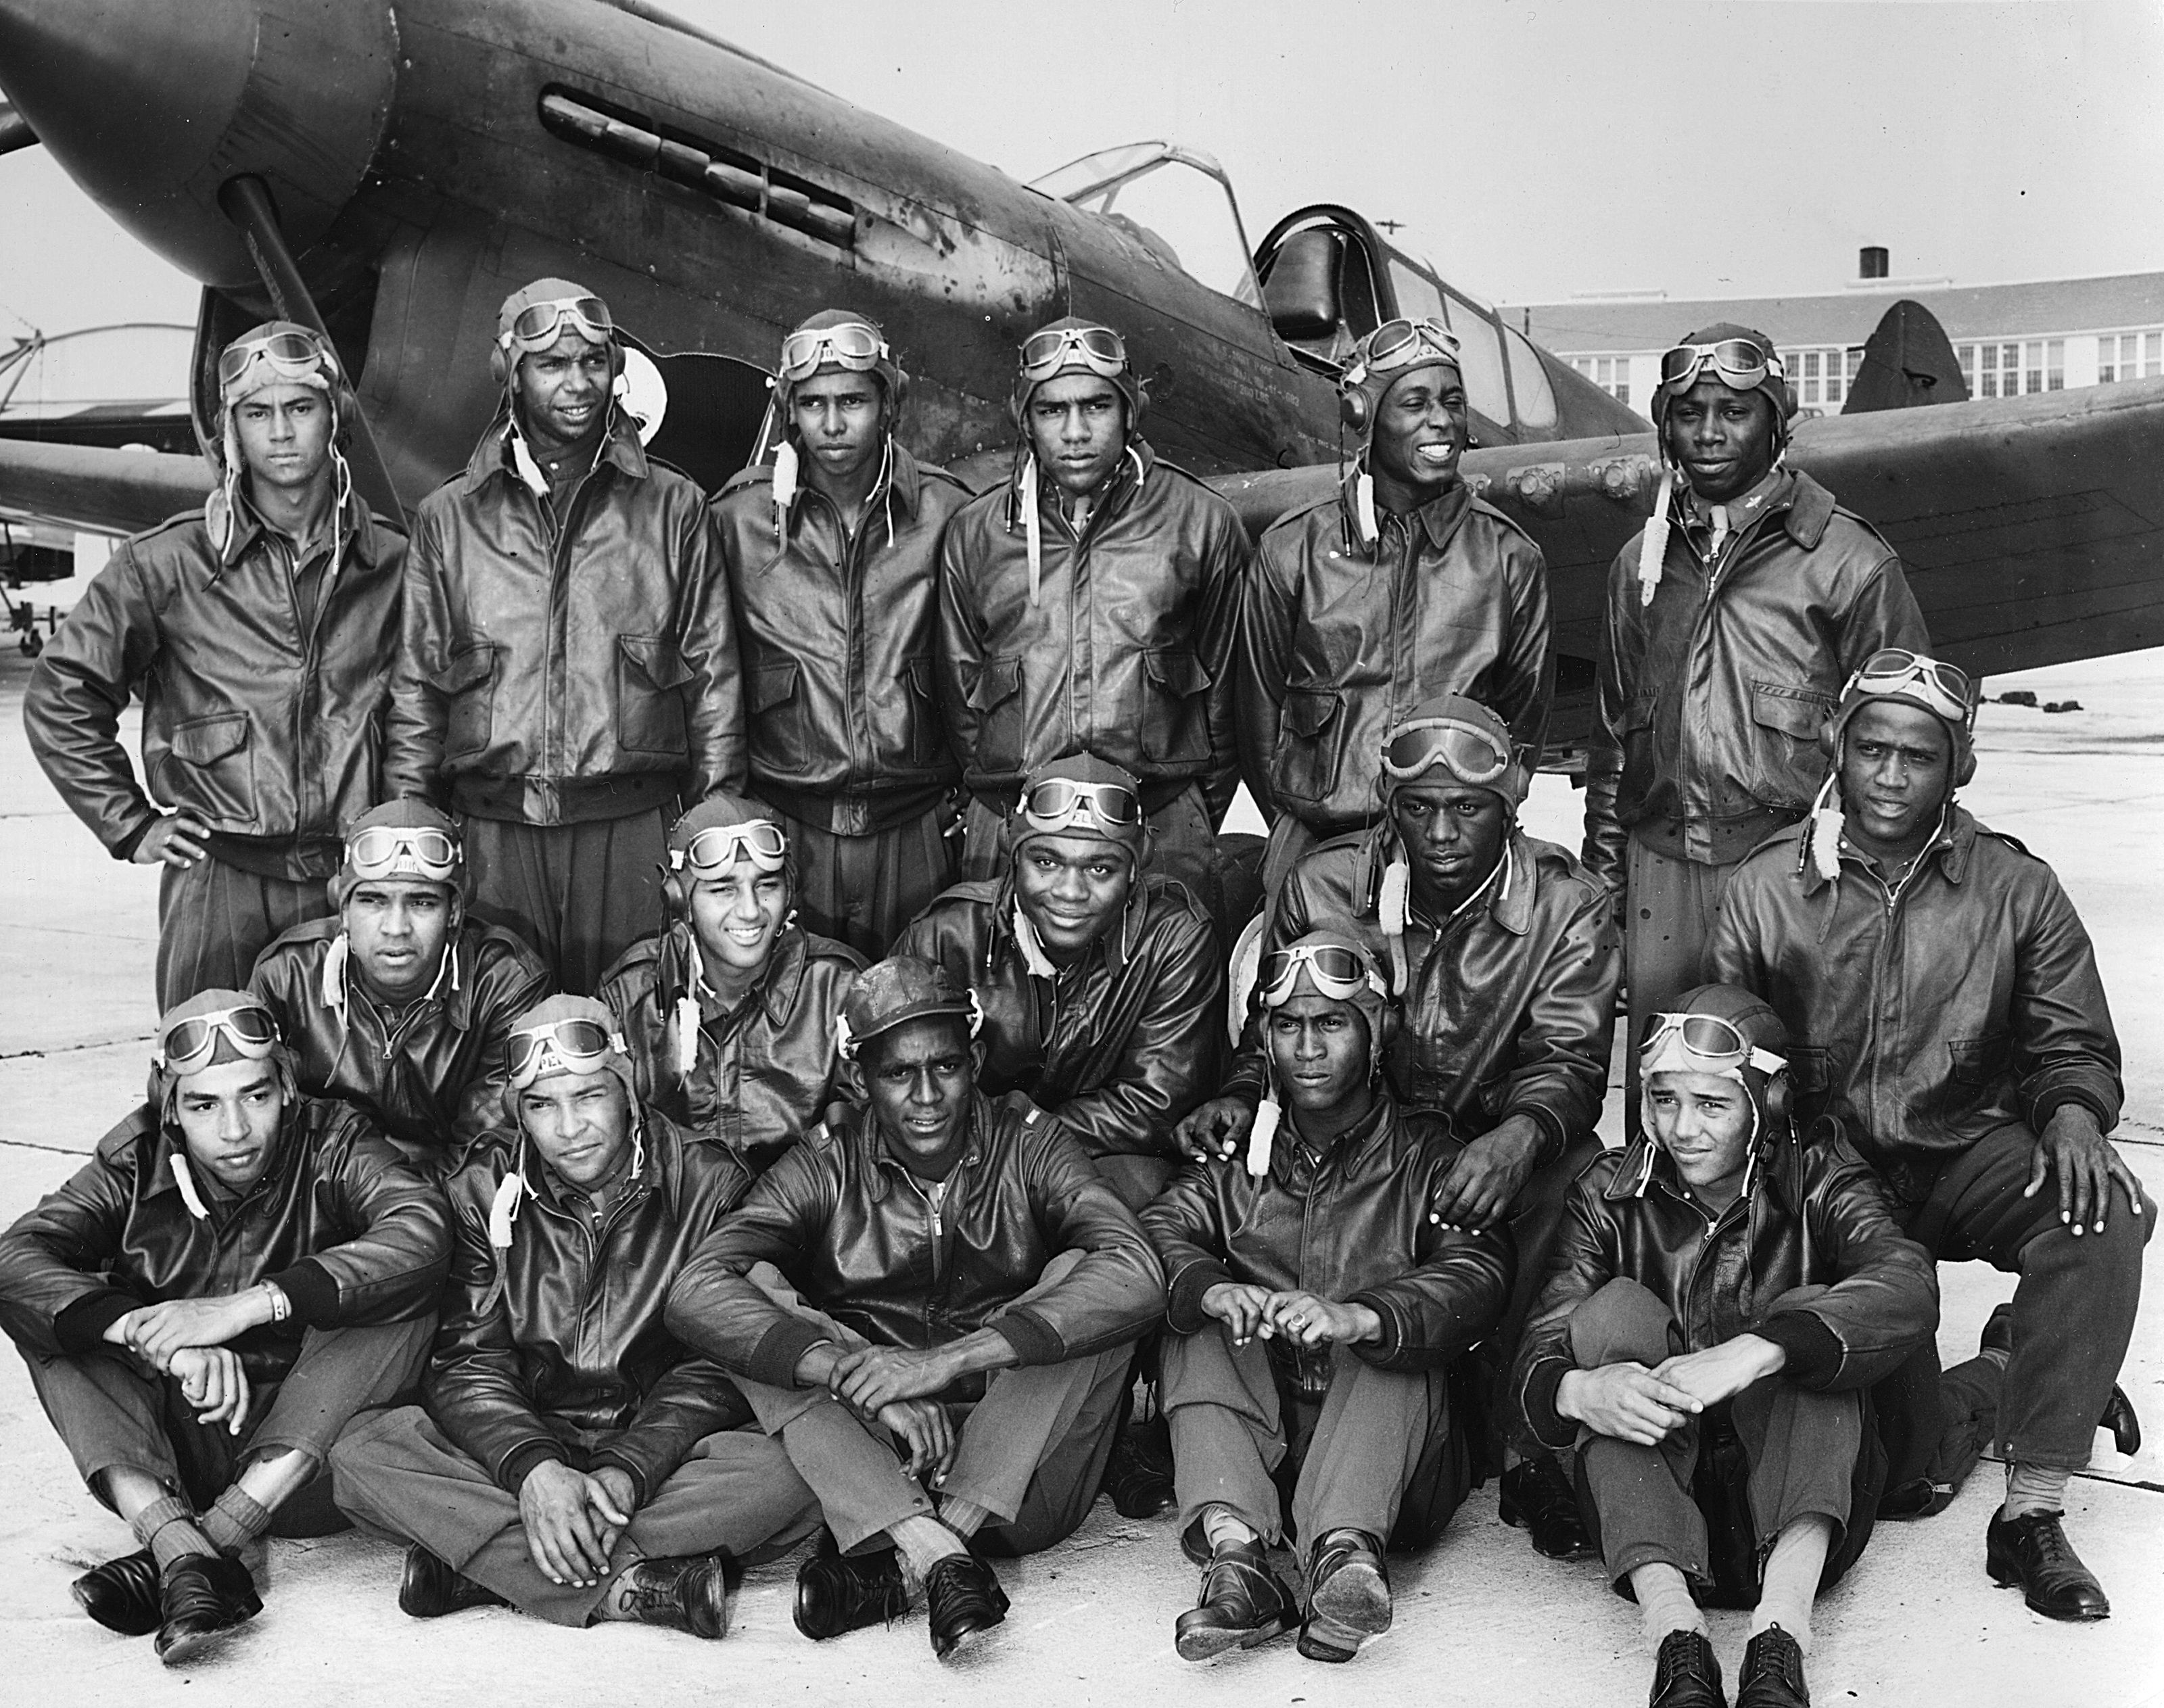 Tuskegee Airmen - Facts, History, Names, and Planes | Red Tails